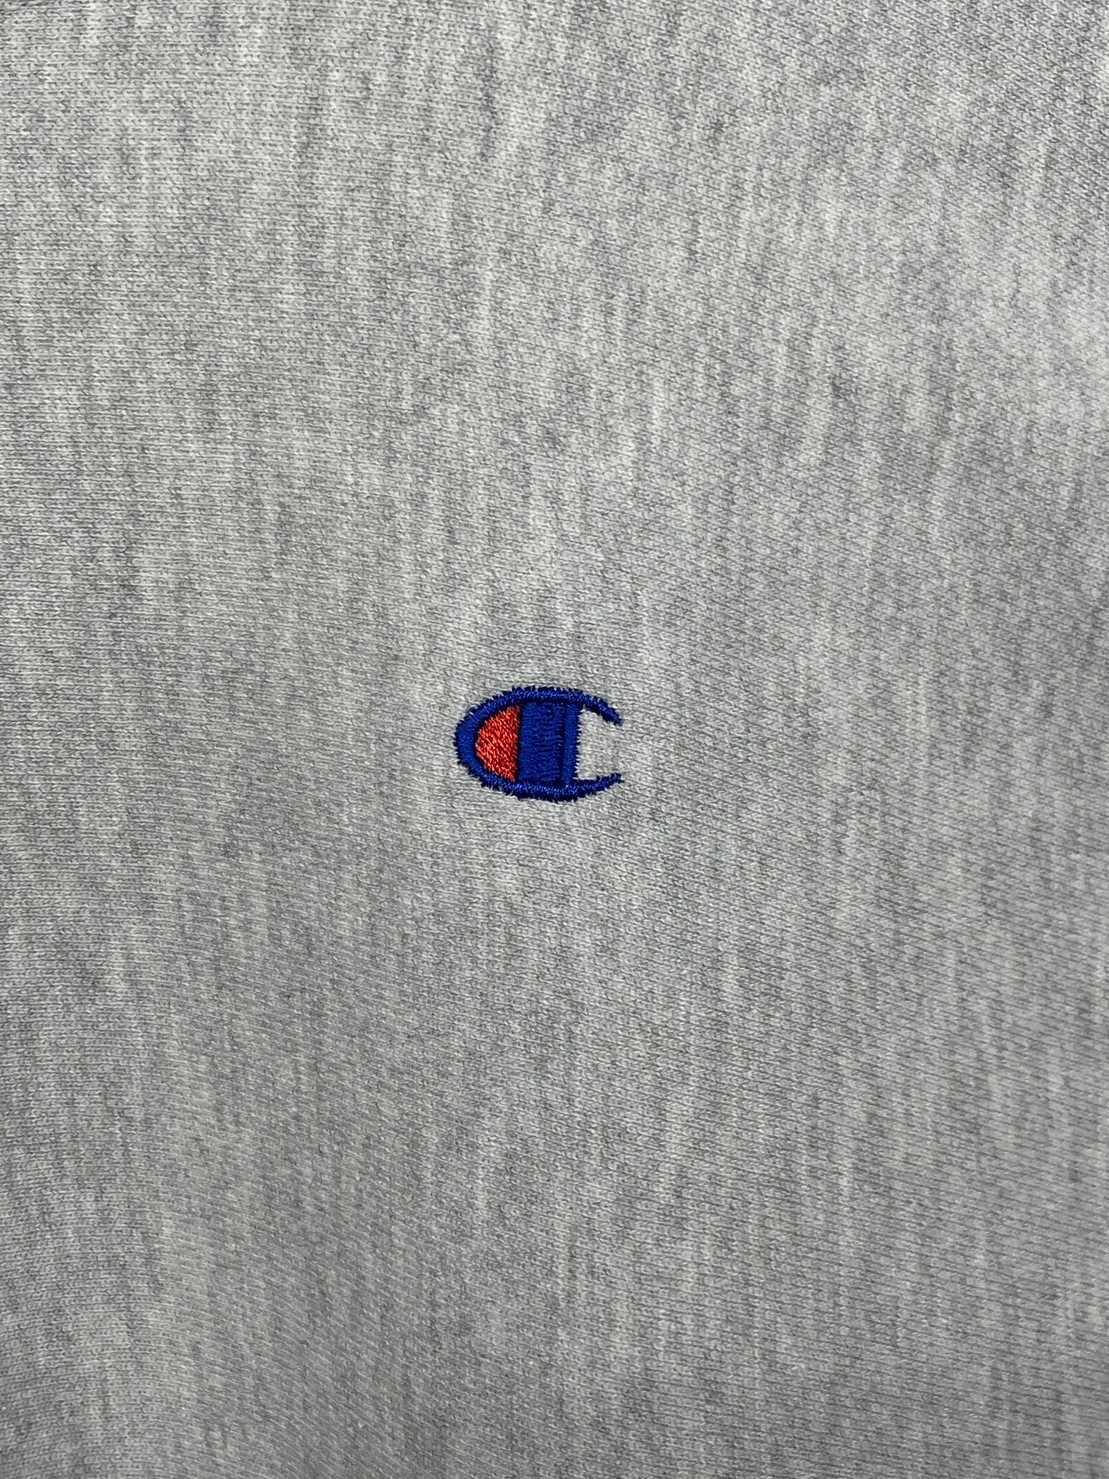 00’s “Champion” REVERSE WEAVE One Point